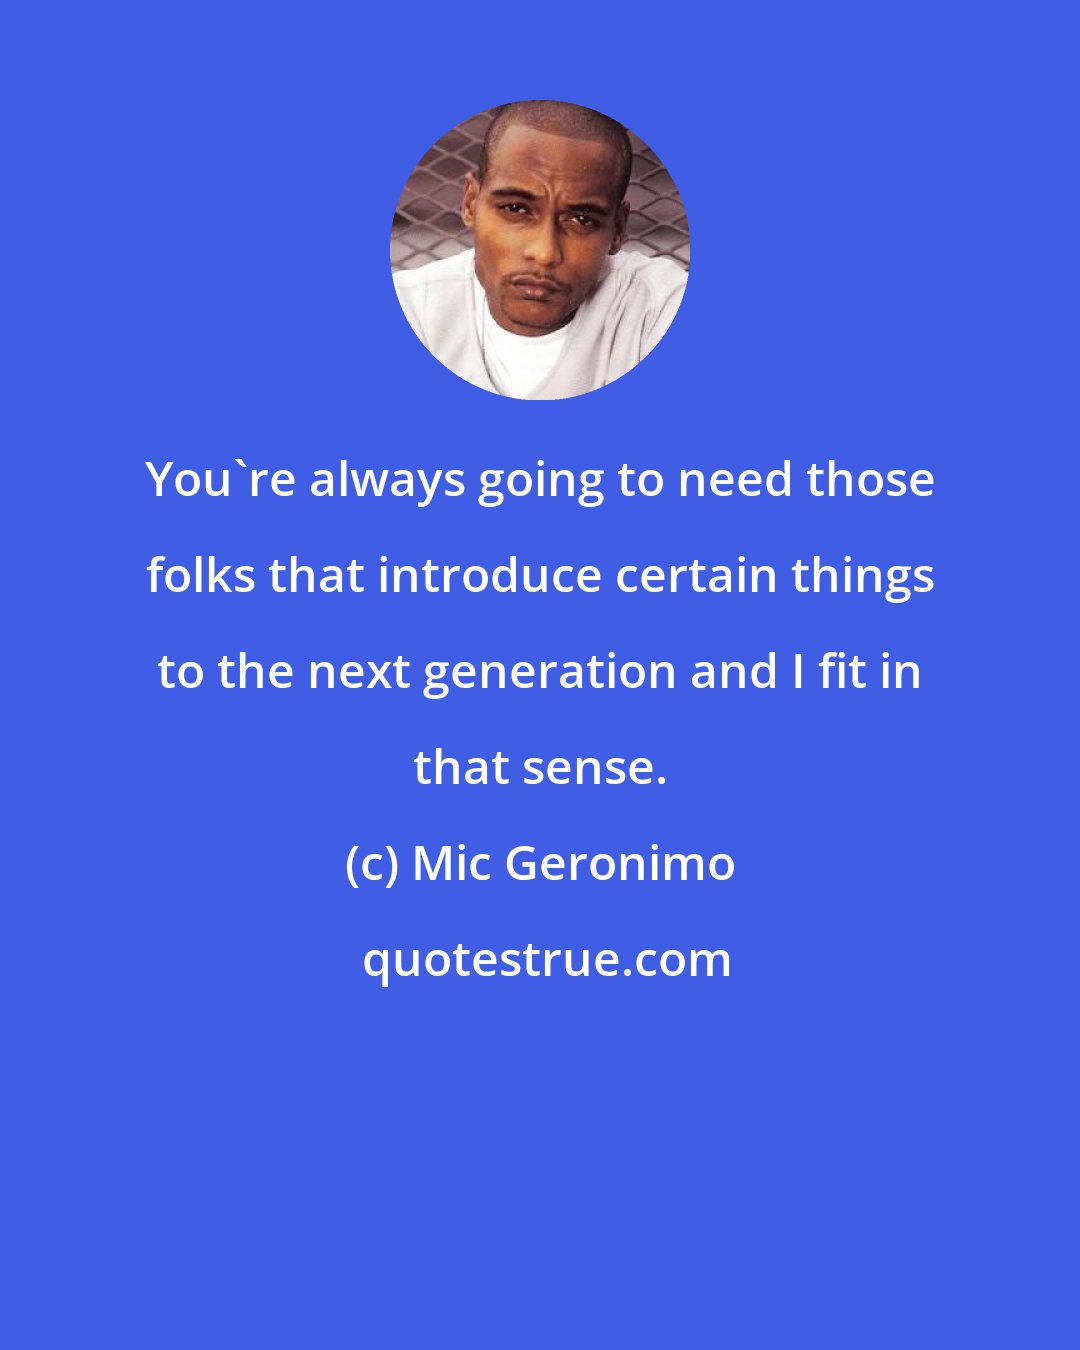 Mic Geronimo: You're always going to need those folks that introduce certain things to the next generation and I fit in that sense.